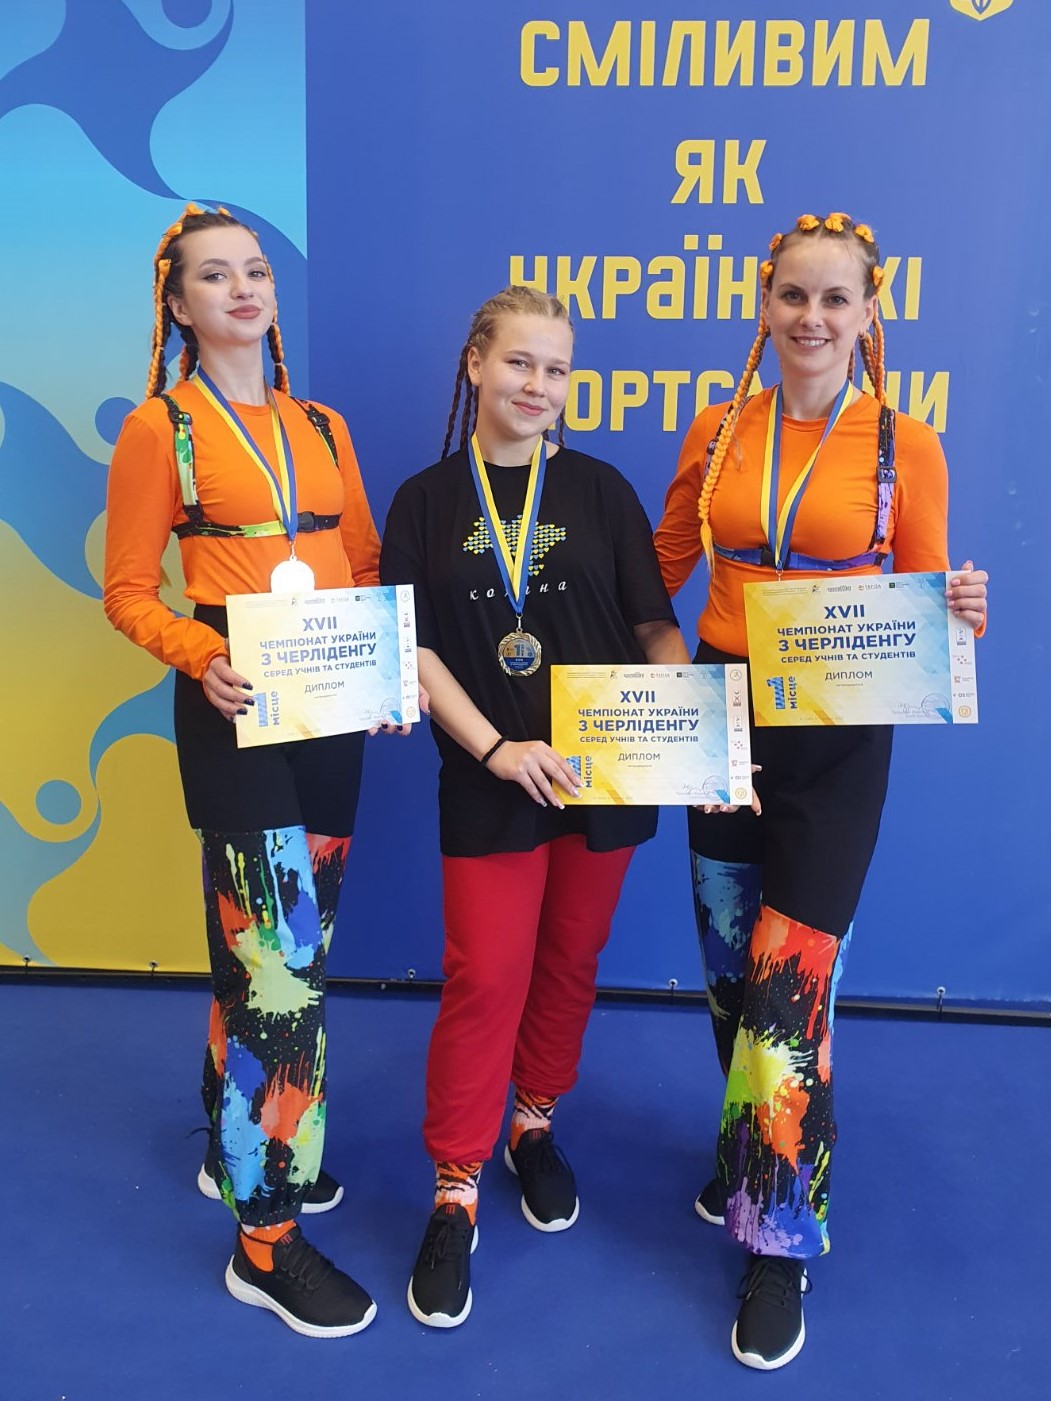 Polytechnic cheerleaders become gold medallists of the XVII Championship of Ukraine among pupils and students